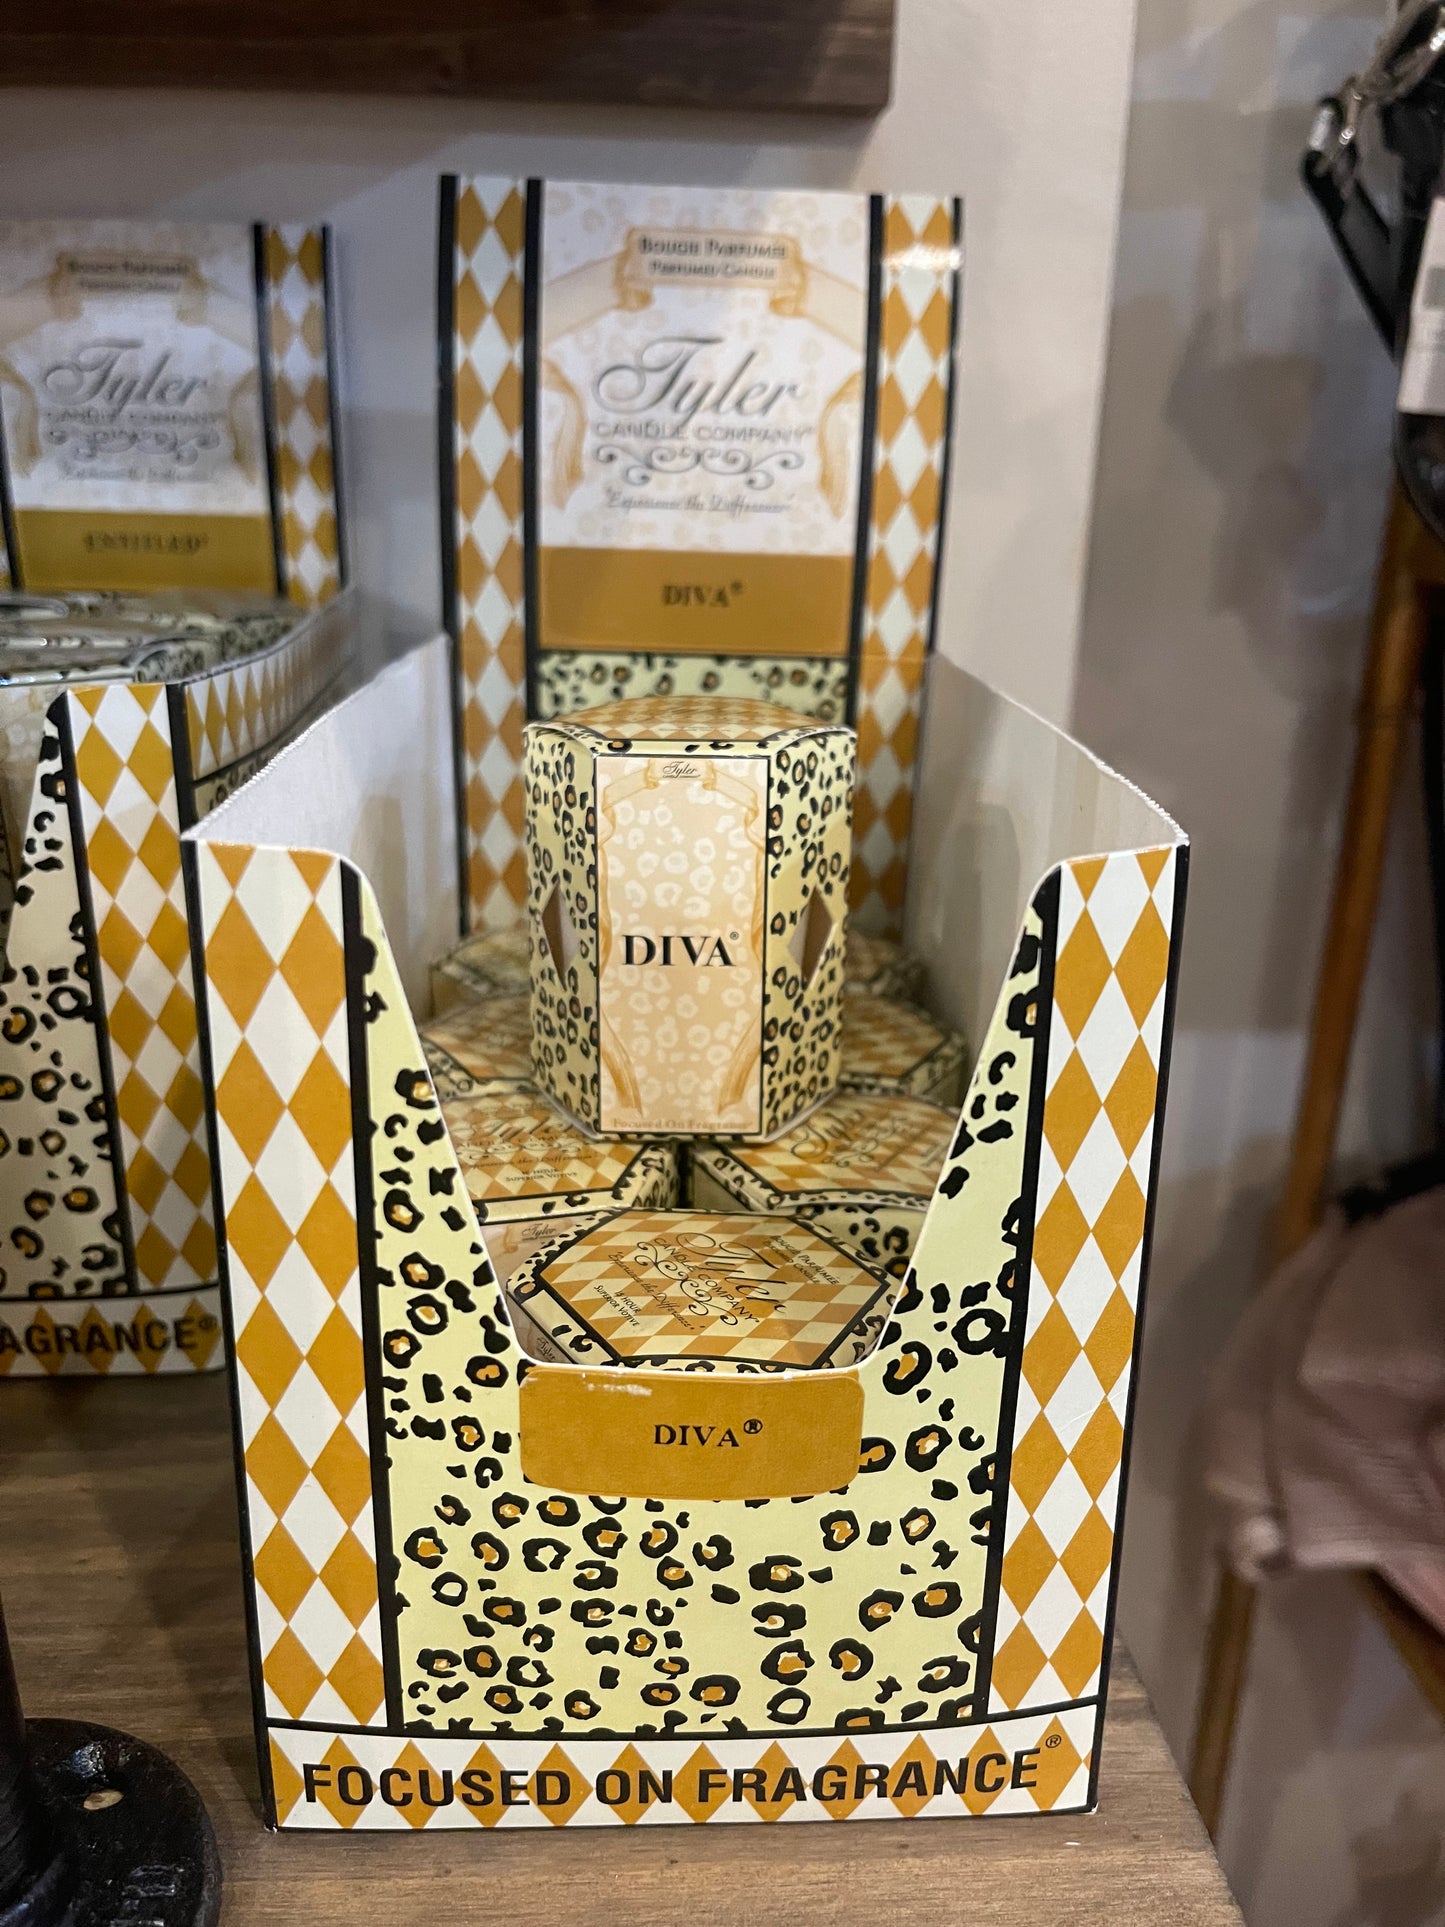 "Diva" Tyler Candle Company Votive Candles.